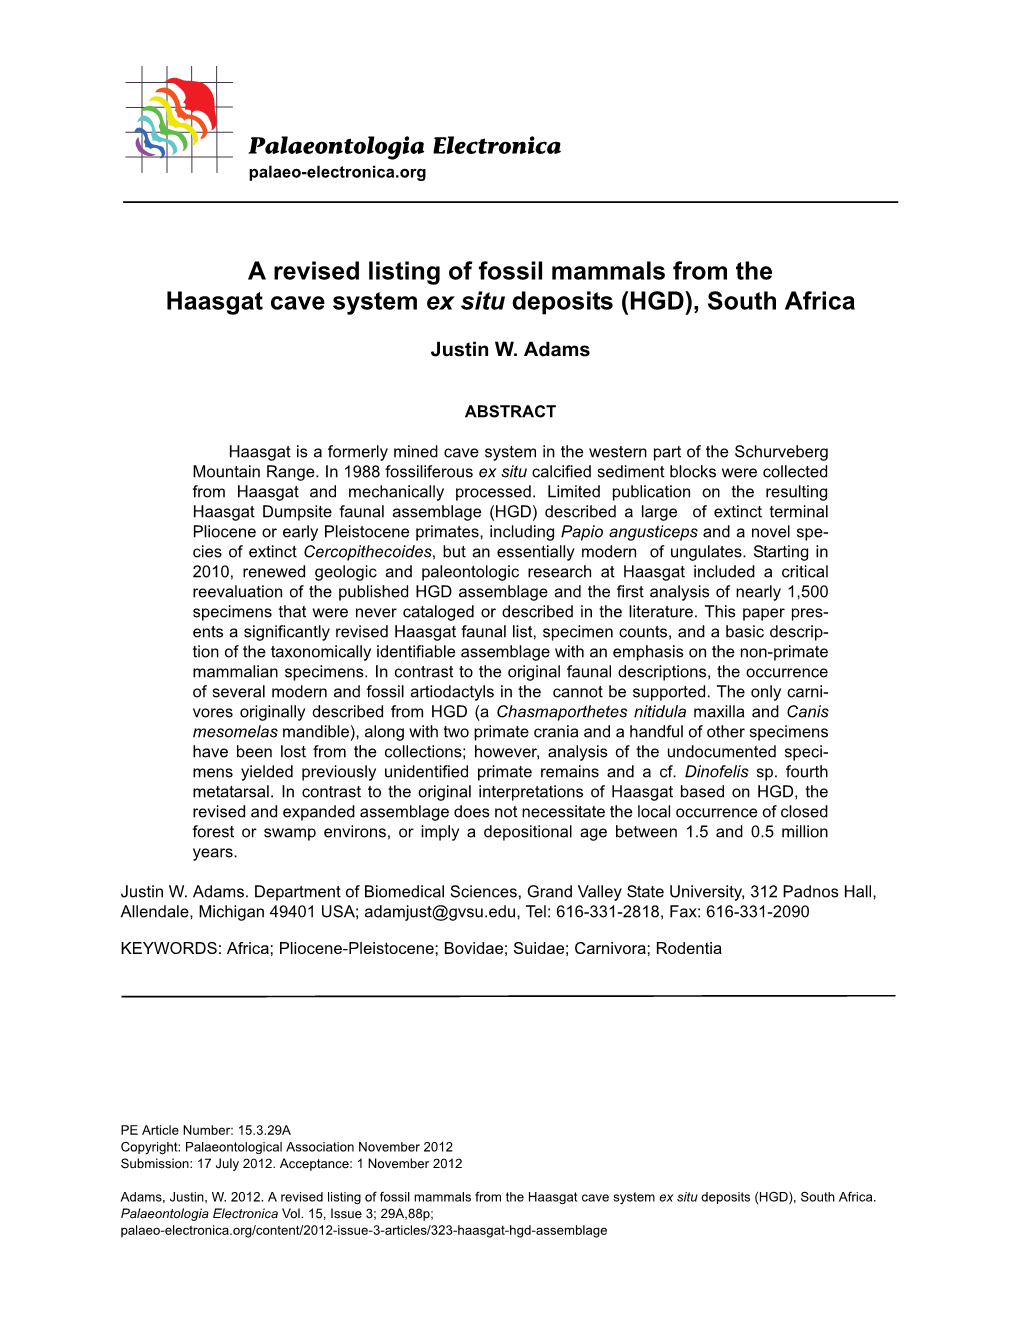 A Revised Listing of Fossil Mammals from the Haasgat Cave System Ex Situ Deposits (HGD), South Africa